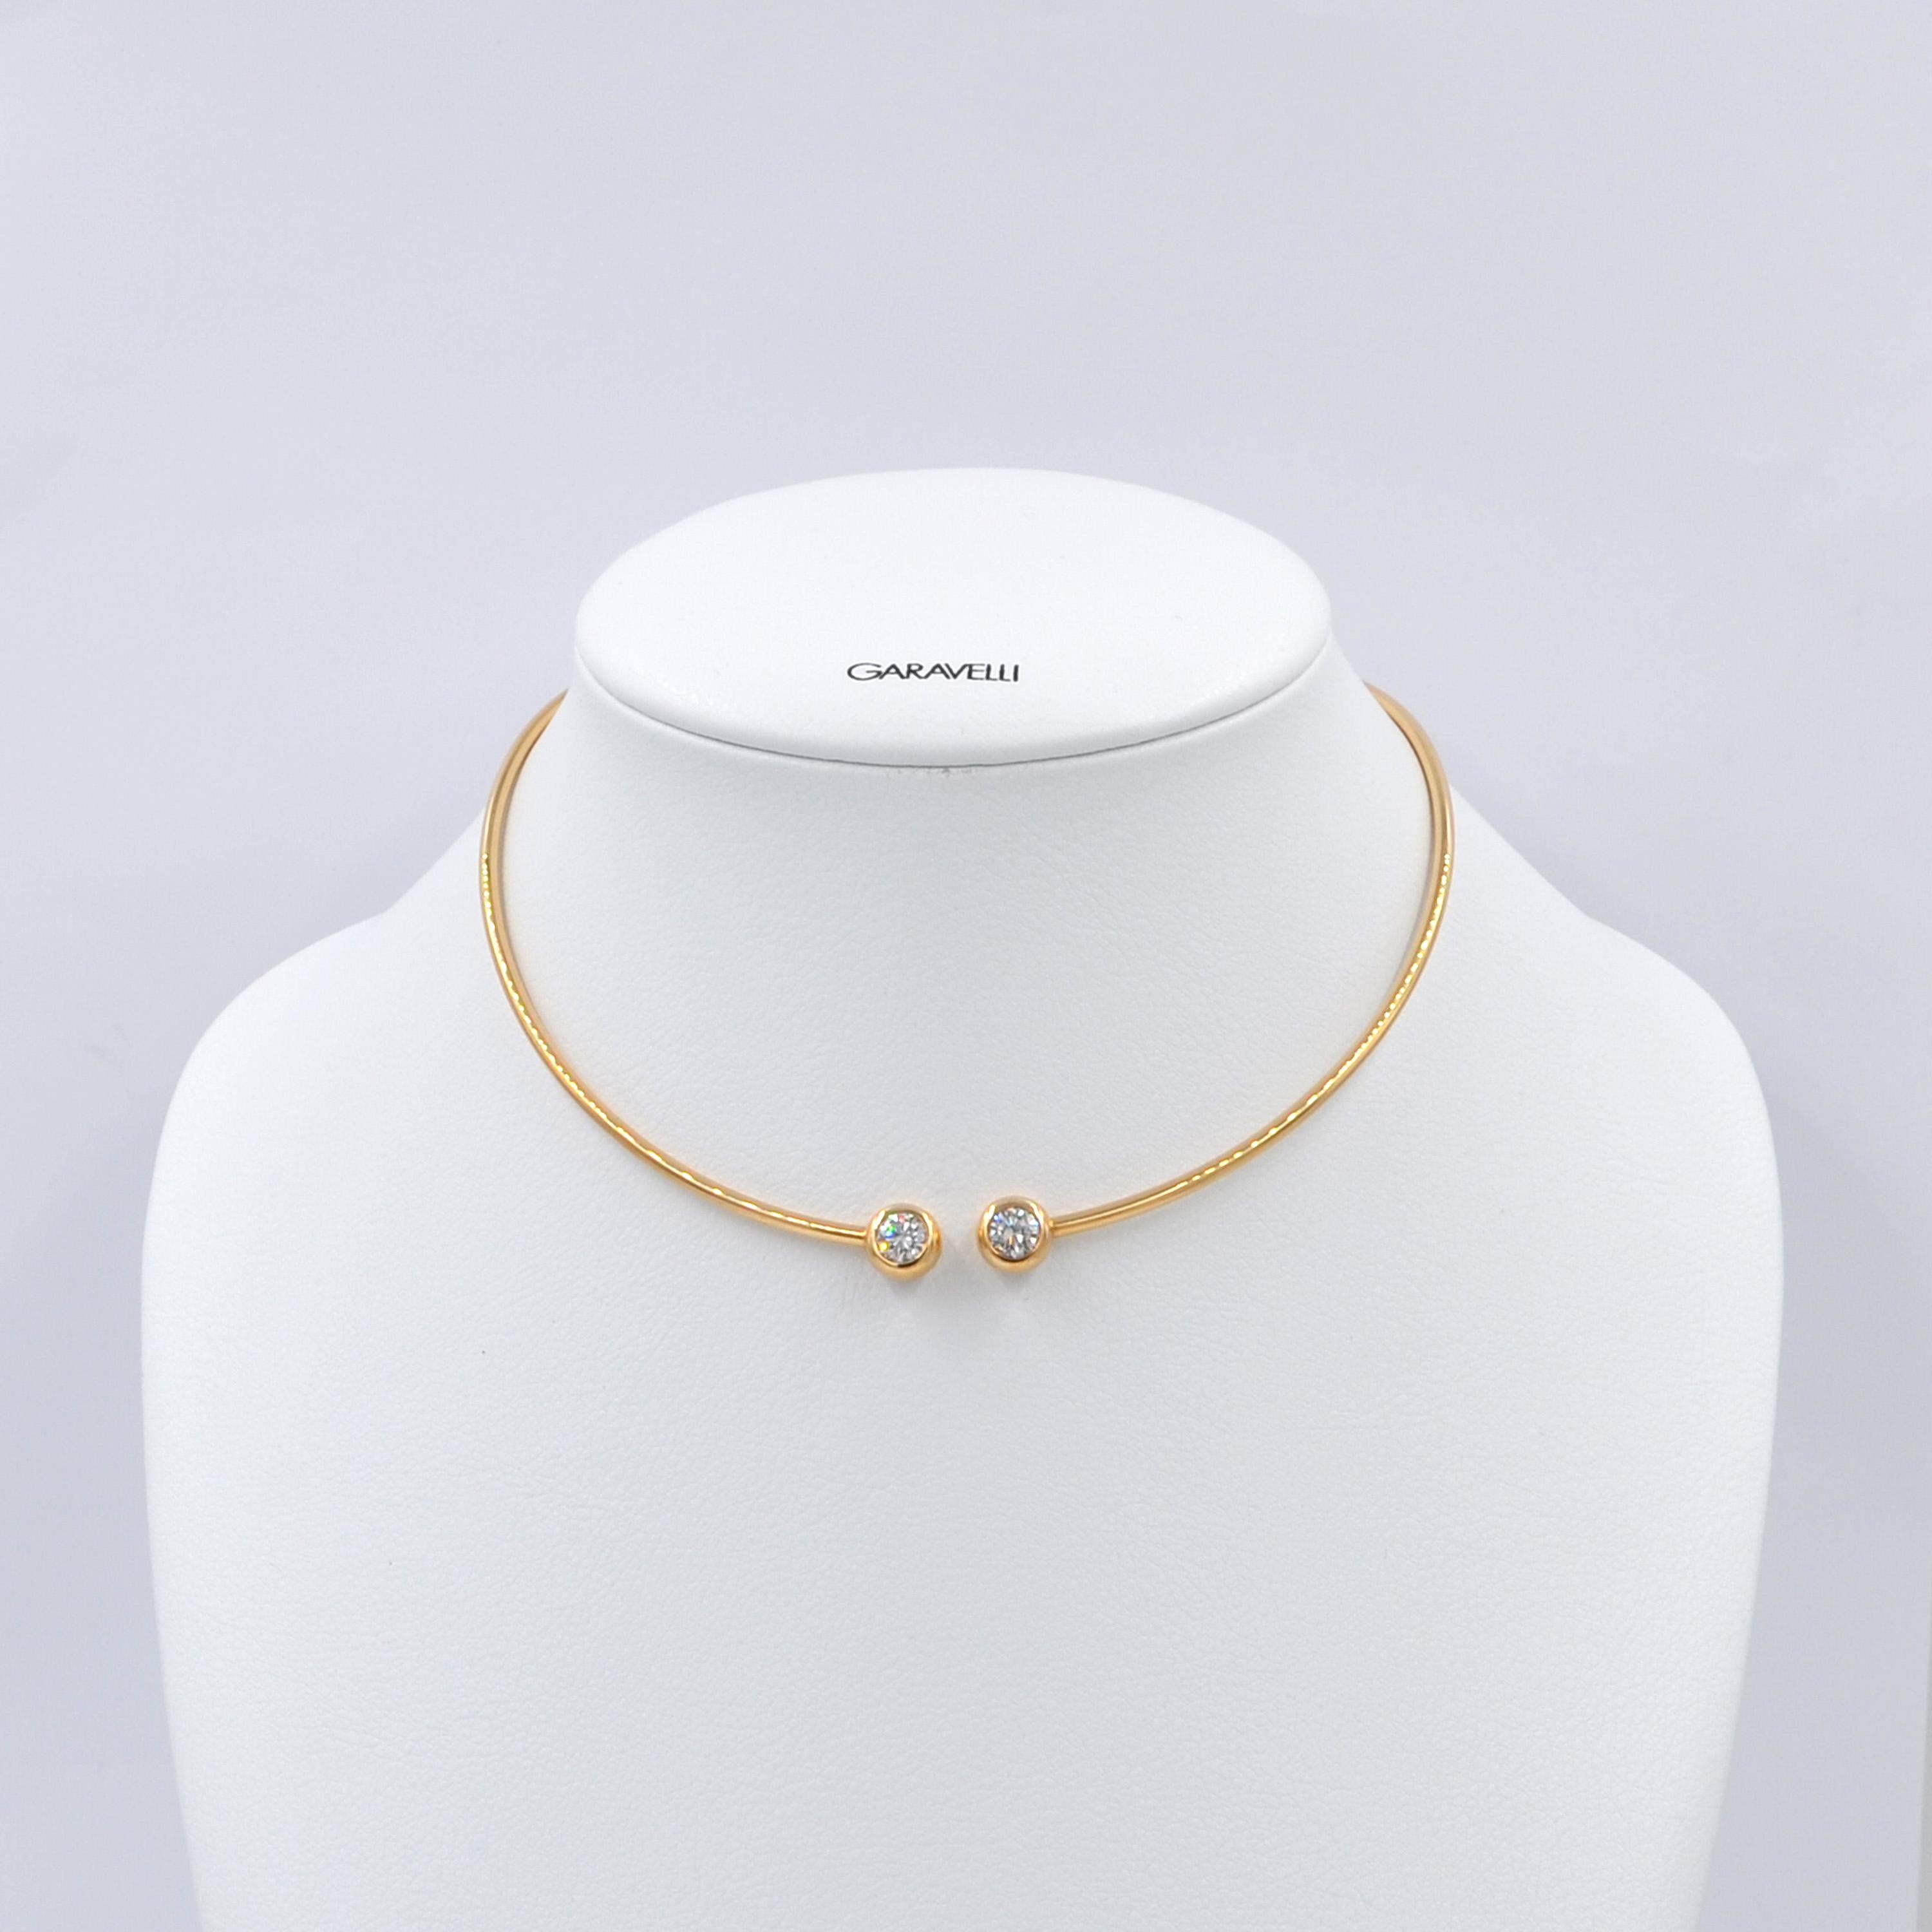 Round Cut Garavelli Giotto Collection Yellow Gold Diamond Choker Necklace